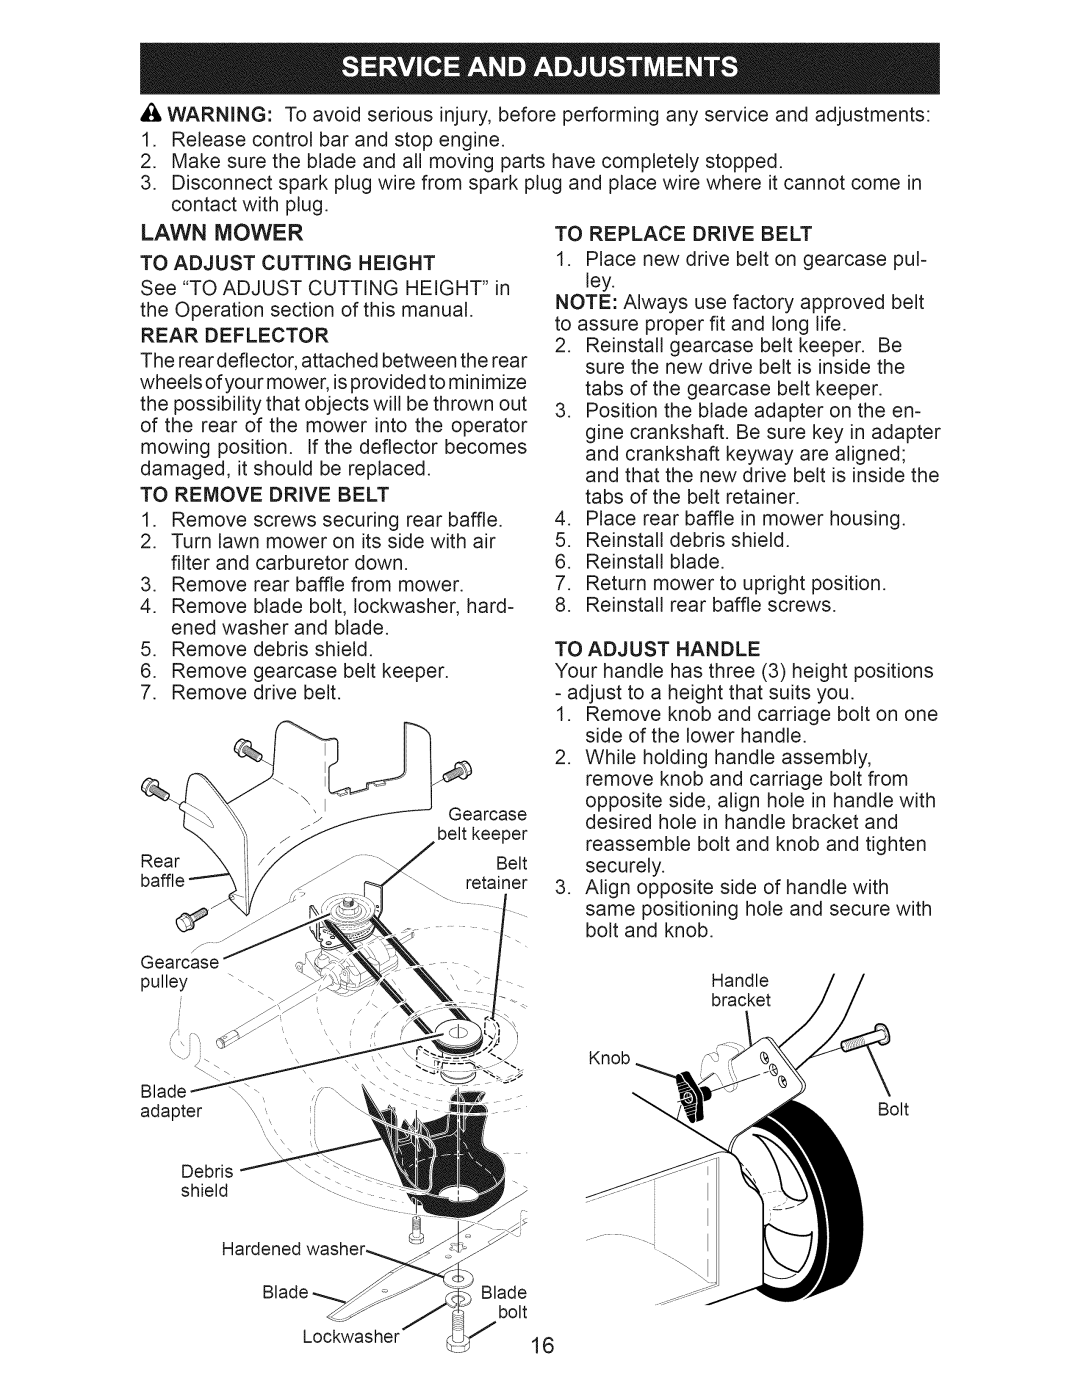 Craftsman 917.374941 manual contact with plug, Lawn Mower 